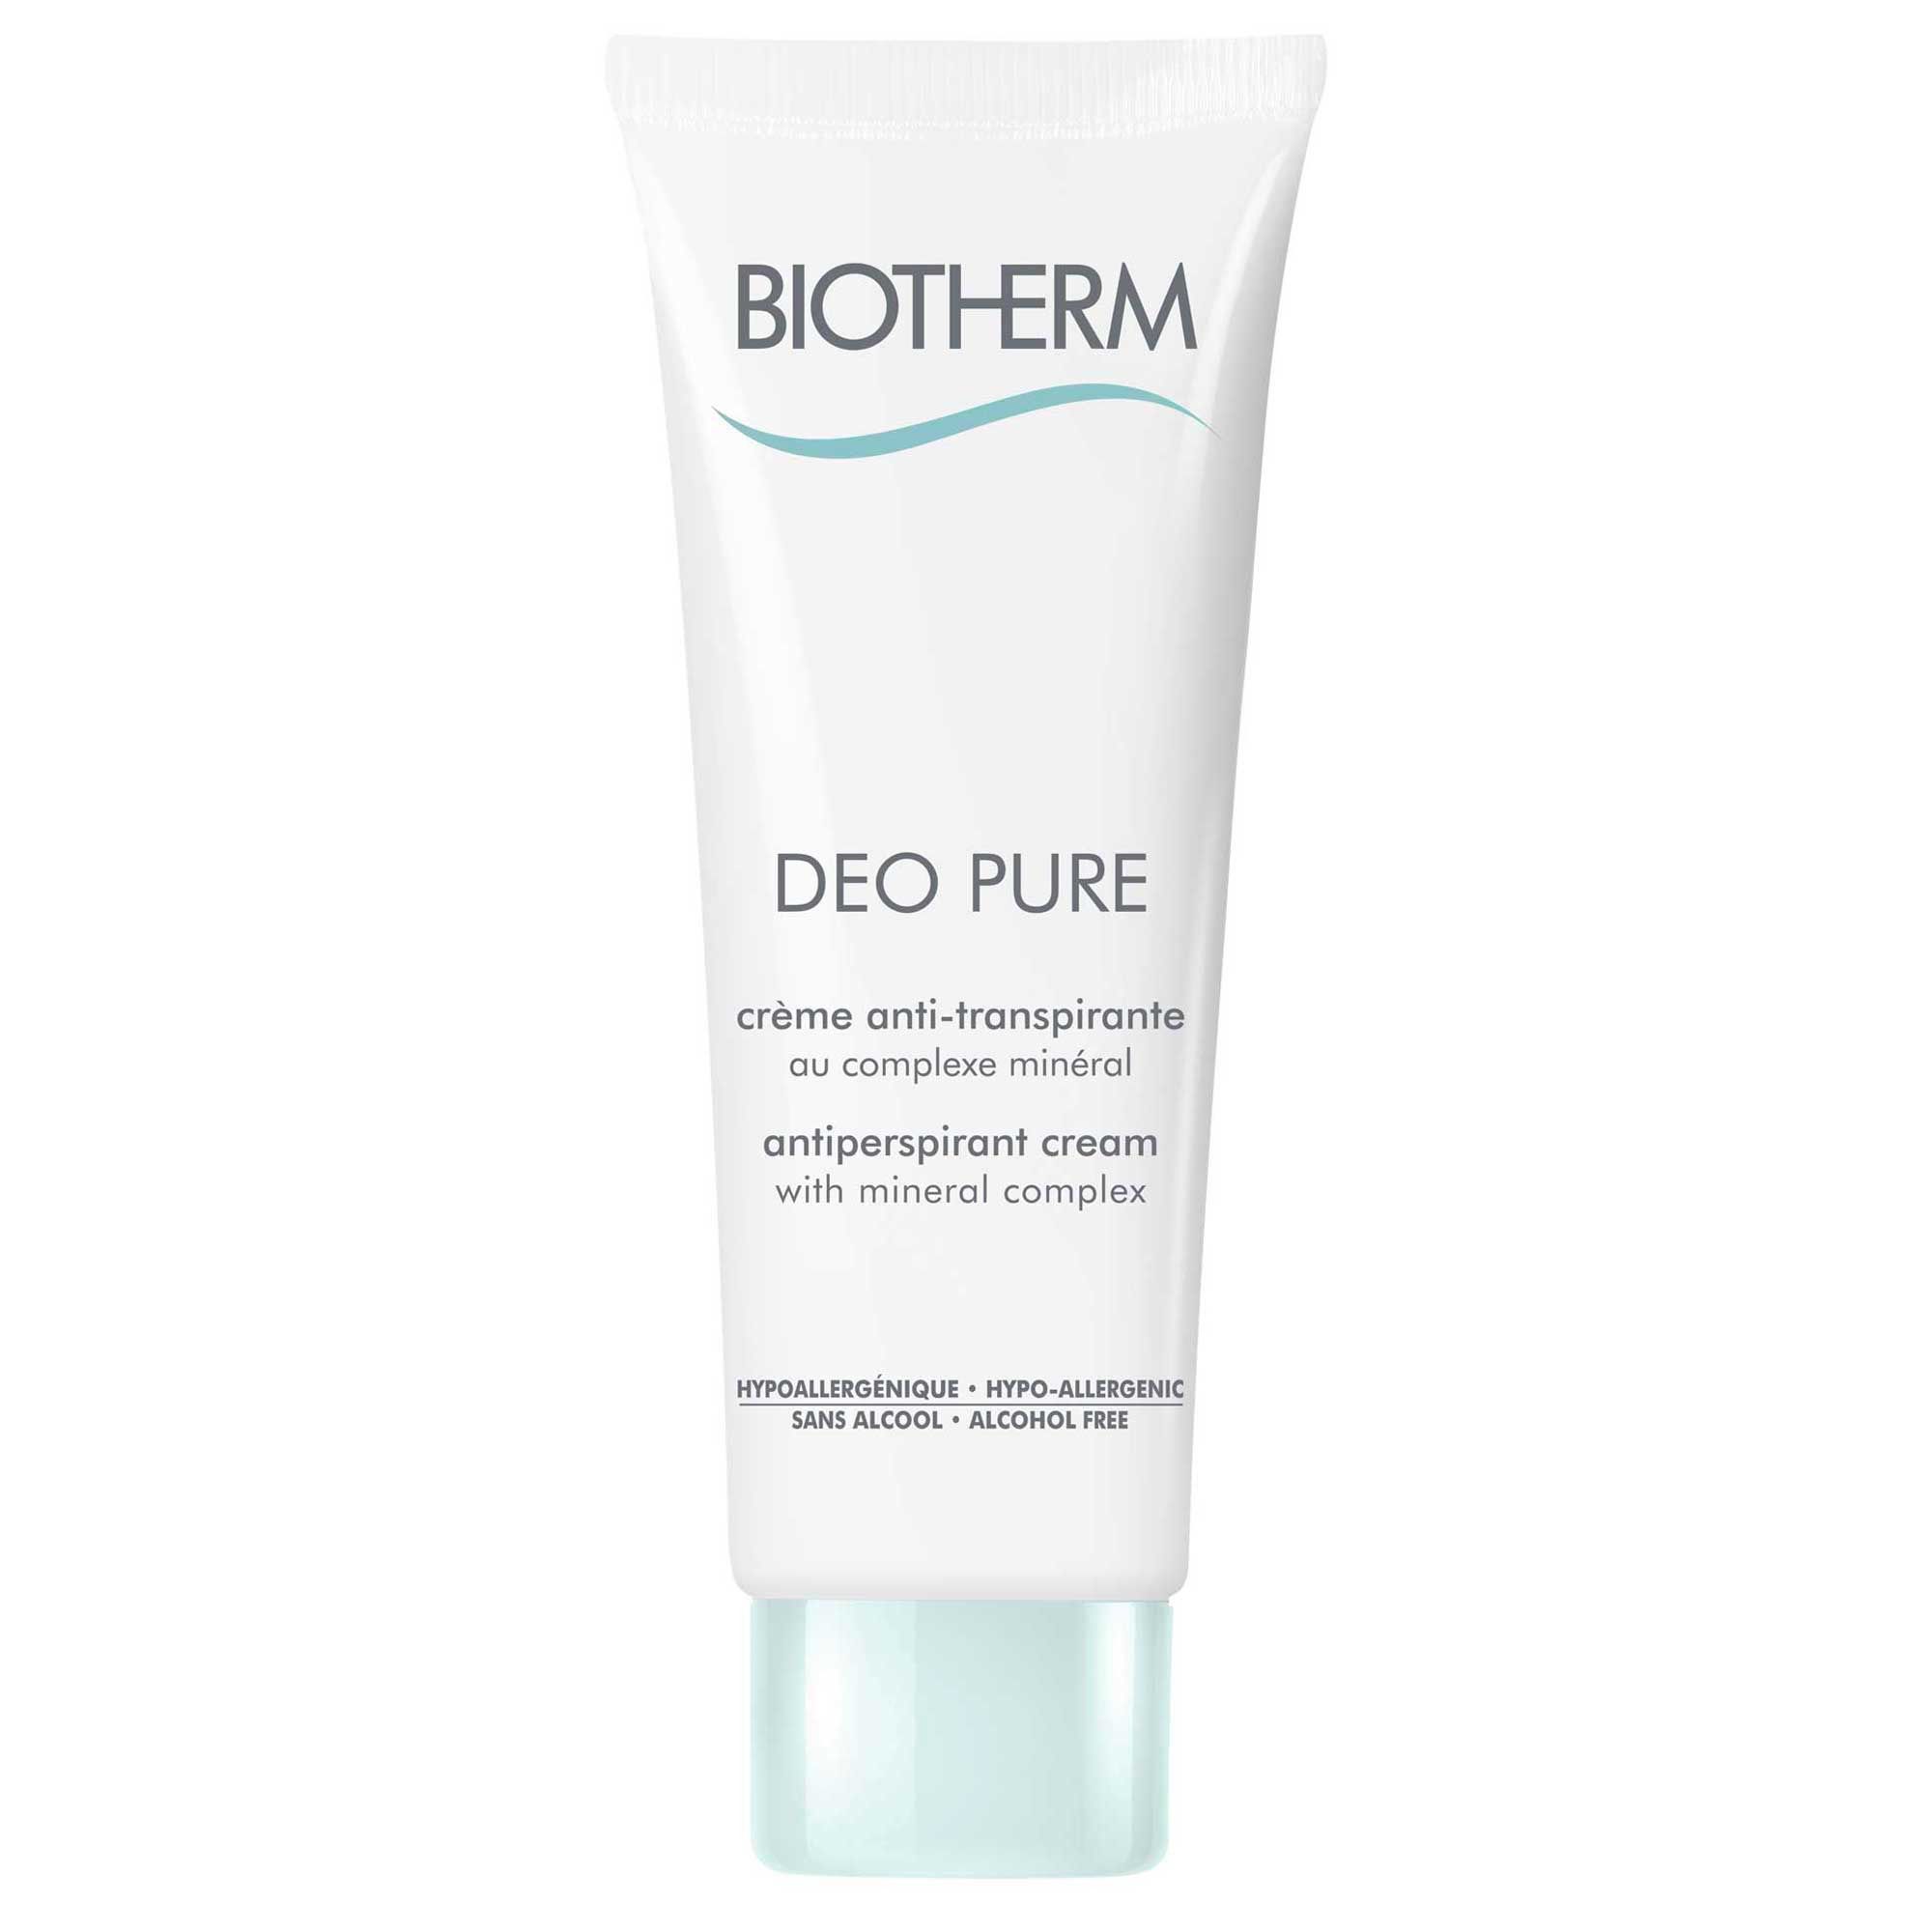 Biotherm Deo Pure - Creme